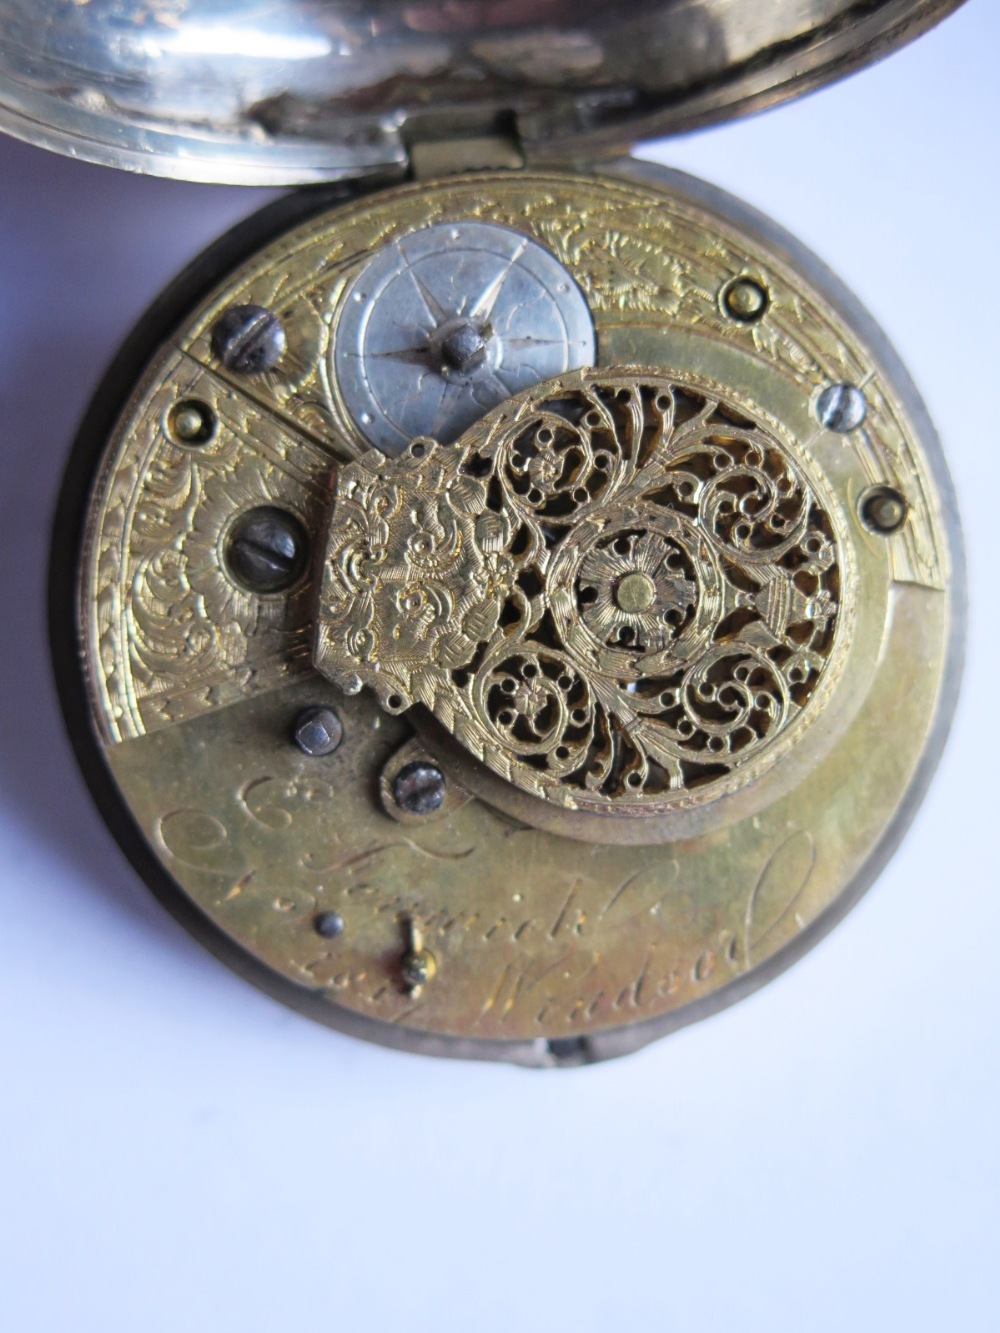 A George III Silver Pair Cased Pocket Watch by E. Fenwick of Windsor, the chain driven fusee - Image 3 of 3